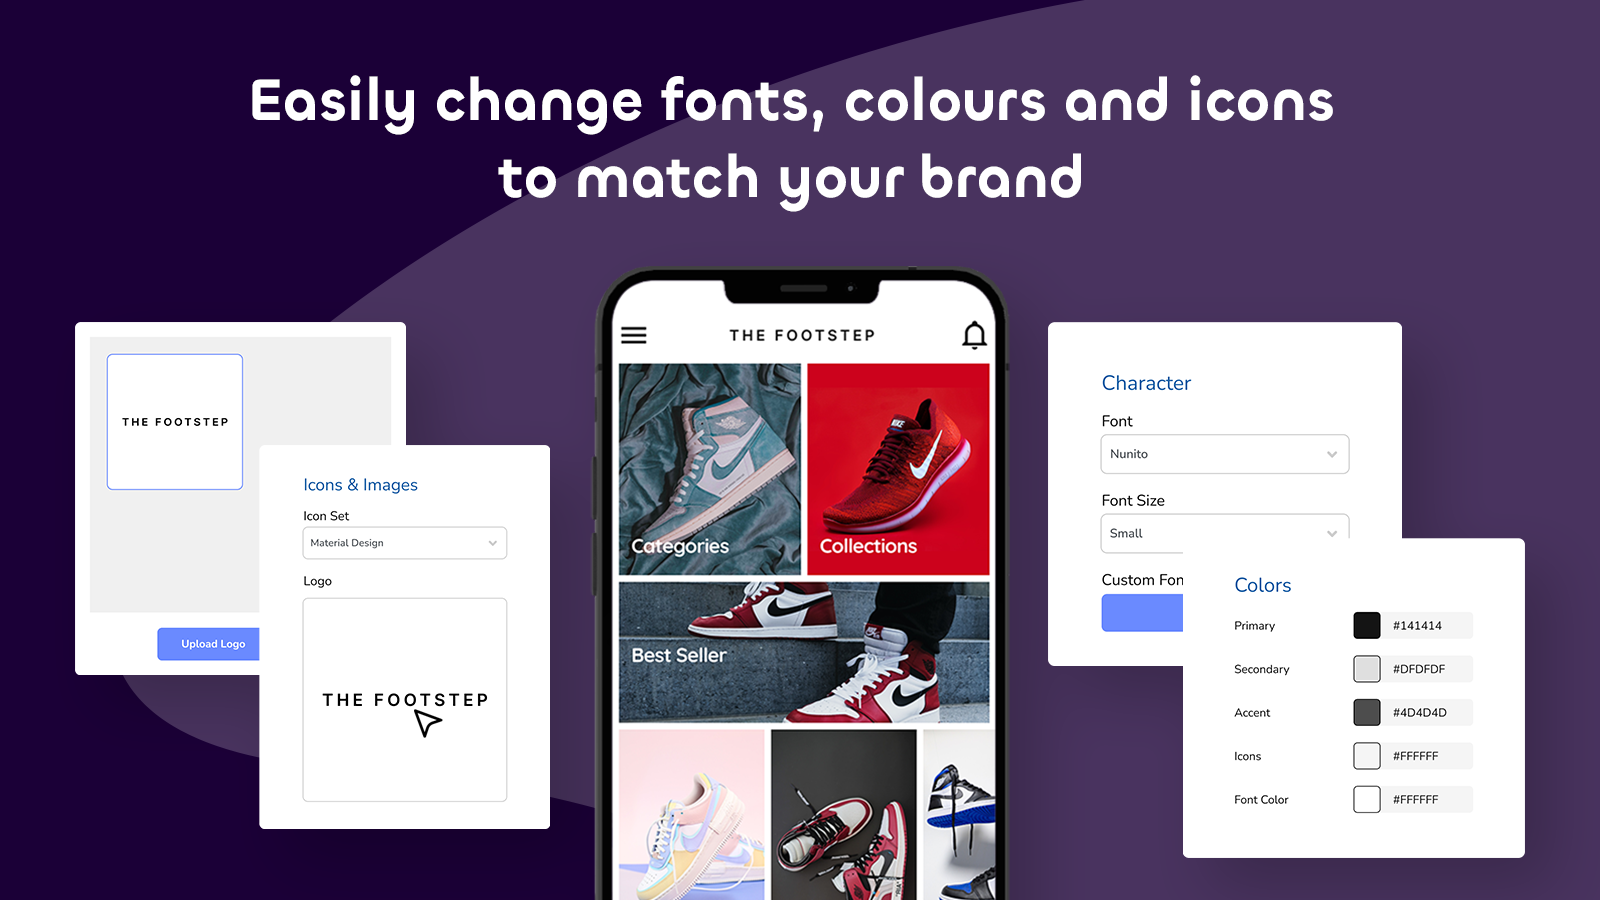 Easily change fonts, colours and icons to match your brand